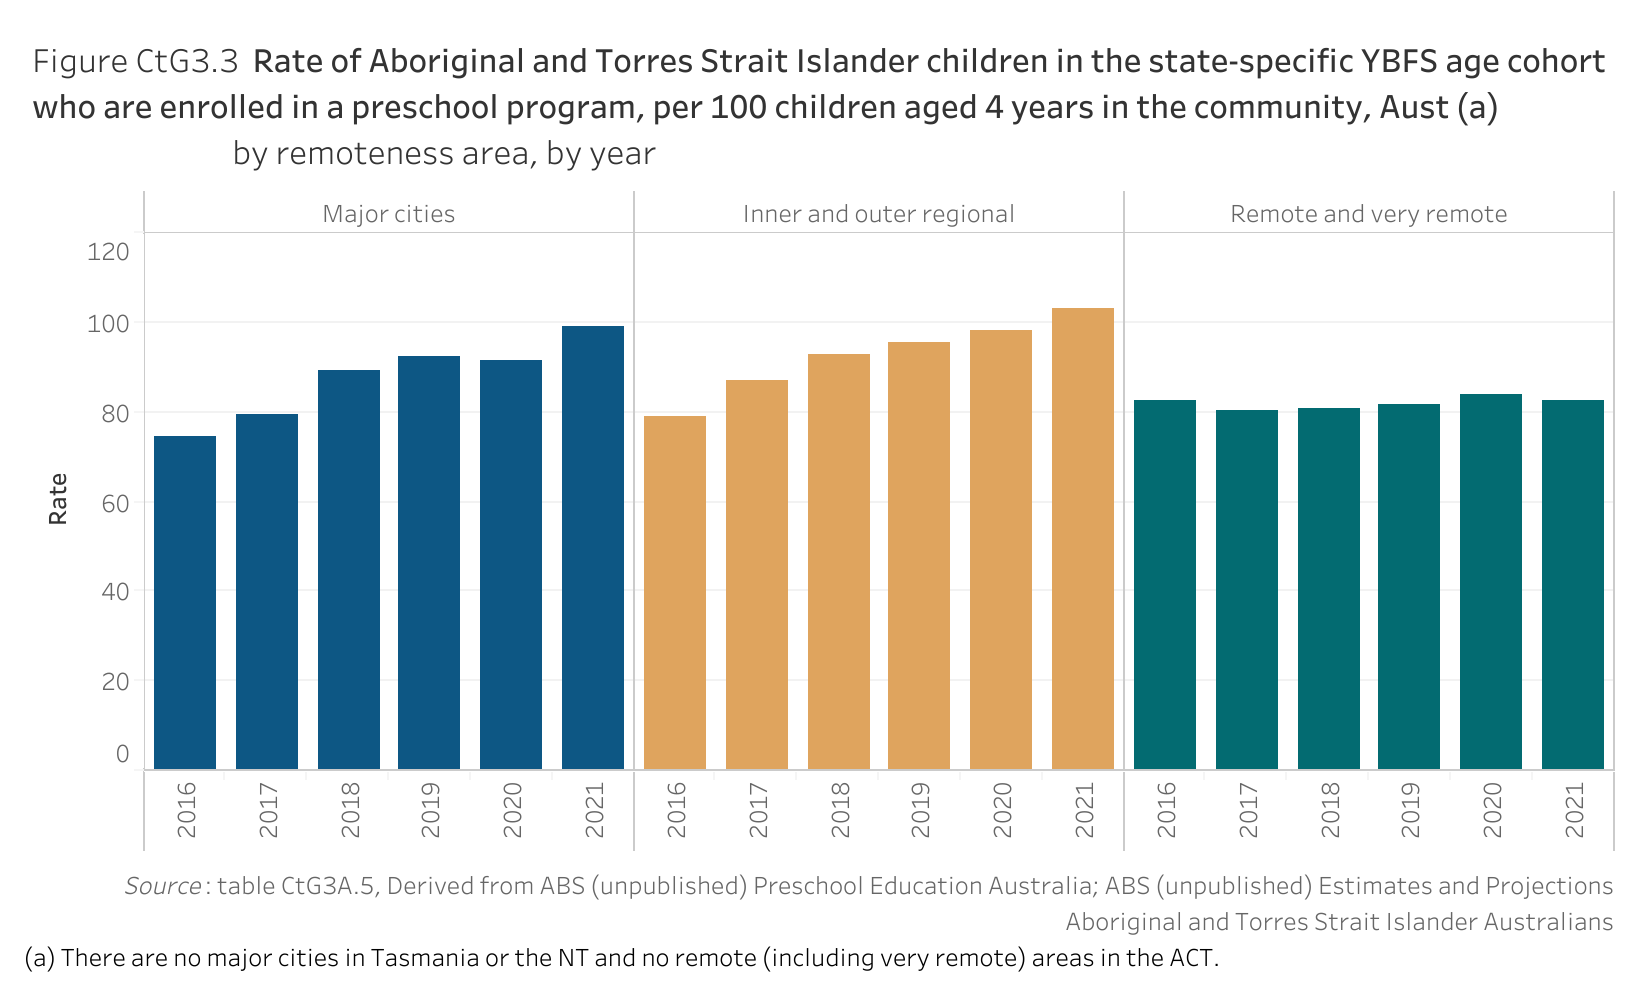 Figure CtG3.3. Bar chart showing the rate of Aboriginal and Torres Strait Islander children in the state-specific Year Before Full-time Schooling (YBFS) age cohort who are enrolled in a preschool program per 100 children aged 4 years in Australia, by remoteness area and by year. Data table of figure CtG3.3 is below.